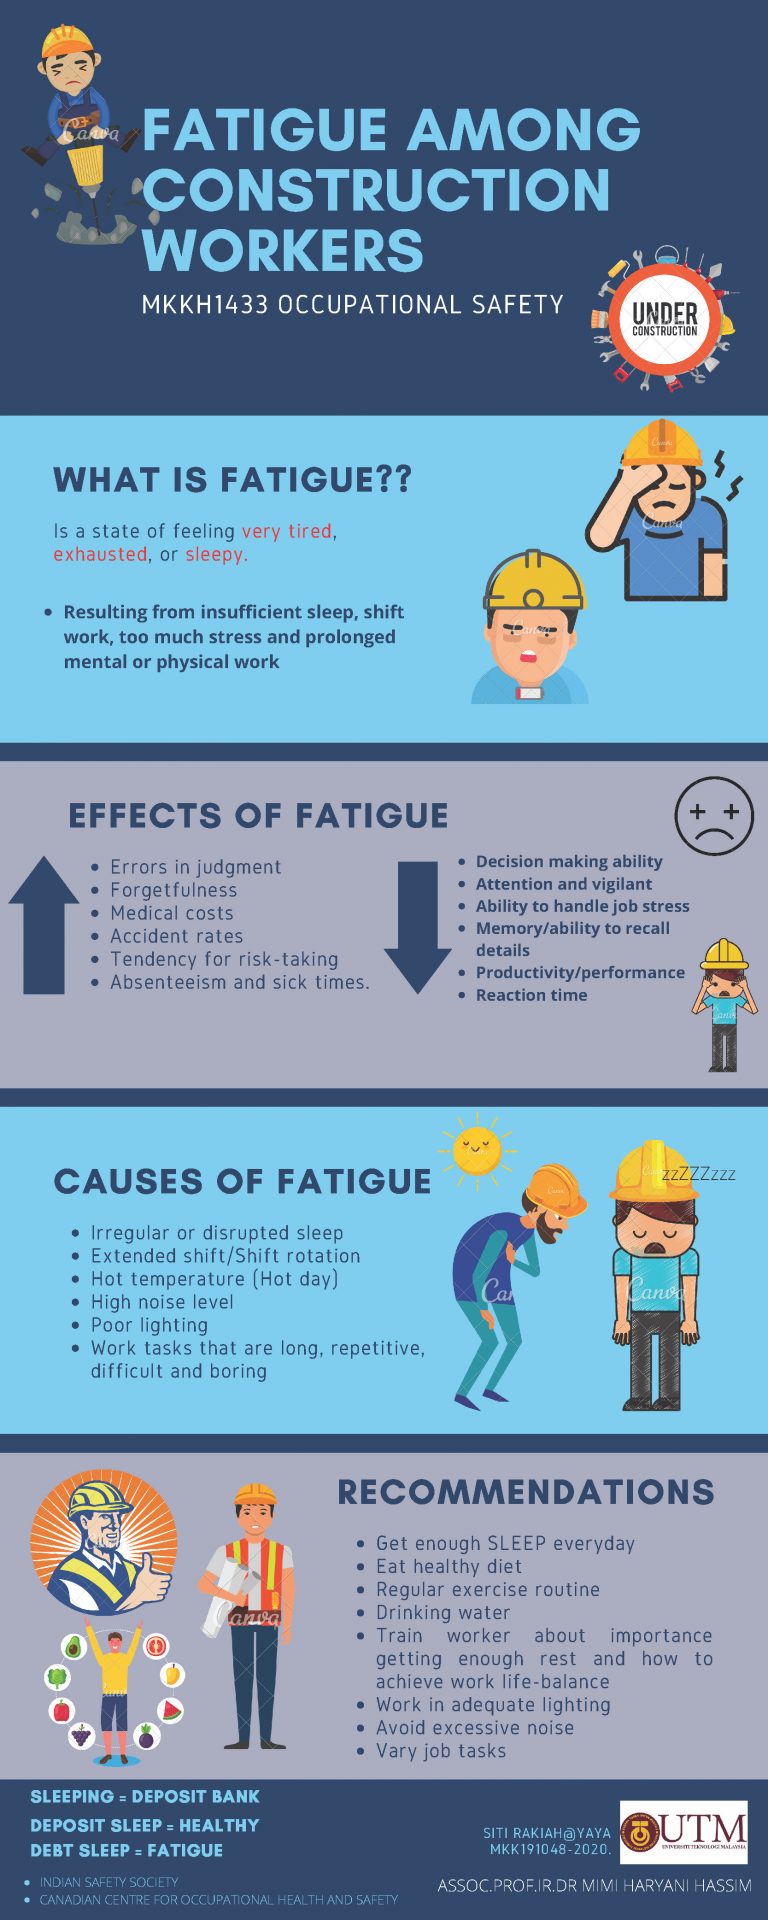 FATIGUE AMONG CONSTRUCTION WORKERS